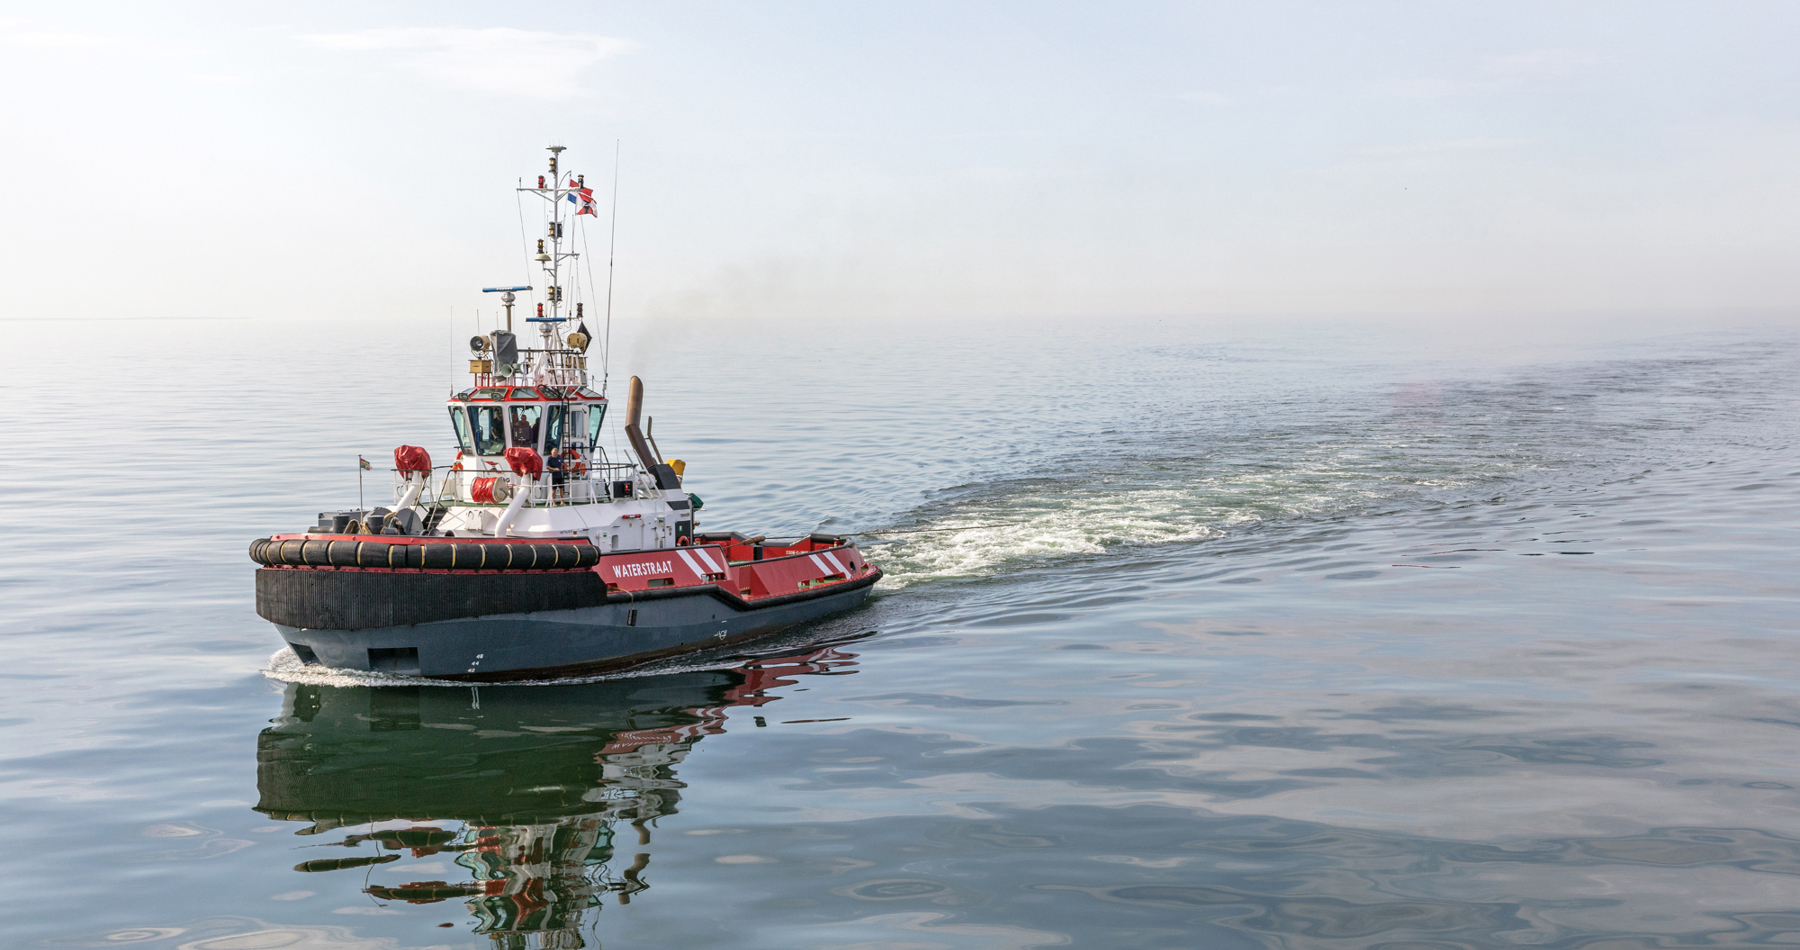 ASD tug 'WATERSTRAAT' ready for another 5 years of service after maintenance and updates